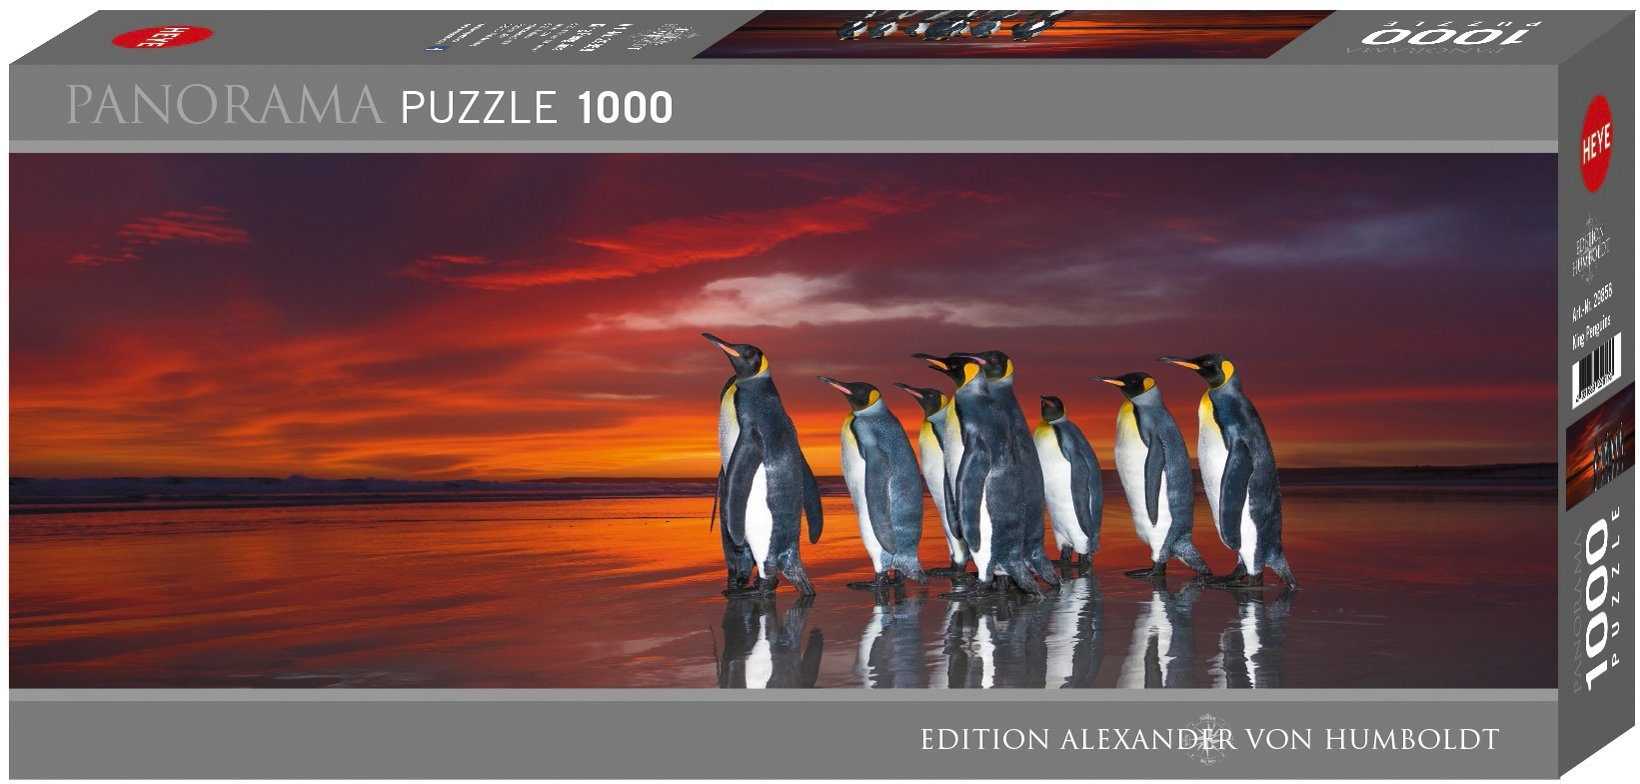 King Puzzleteile, 1000 Europe in HEYE Edition Humboldt, Puzzle Made Penguins,